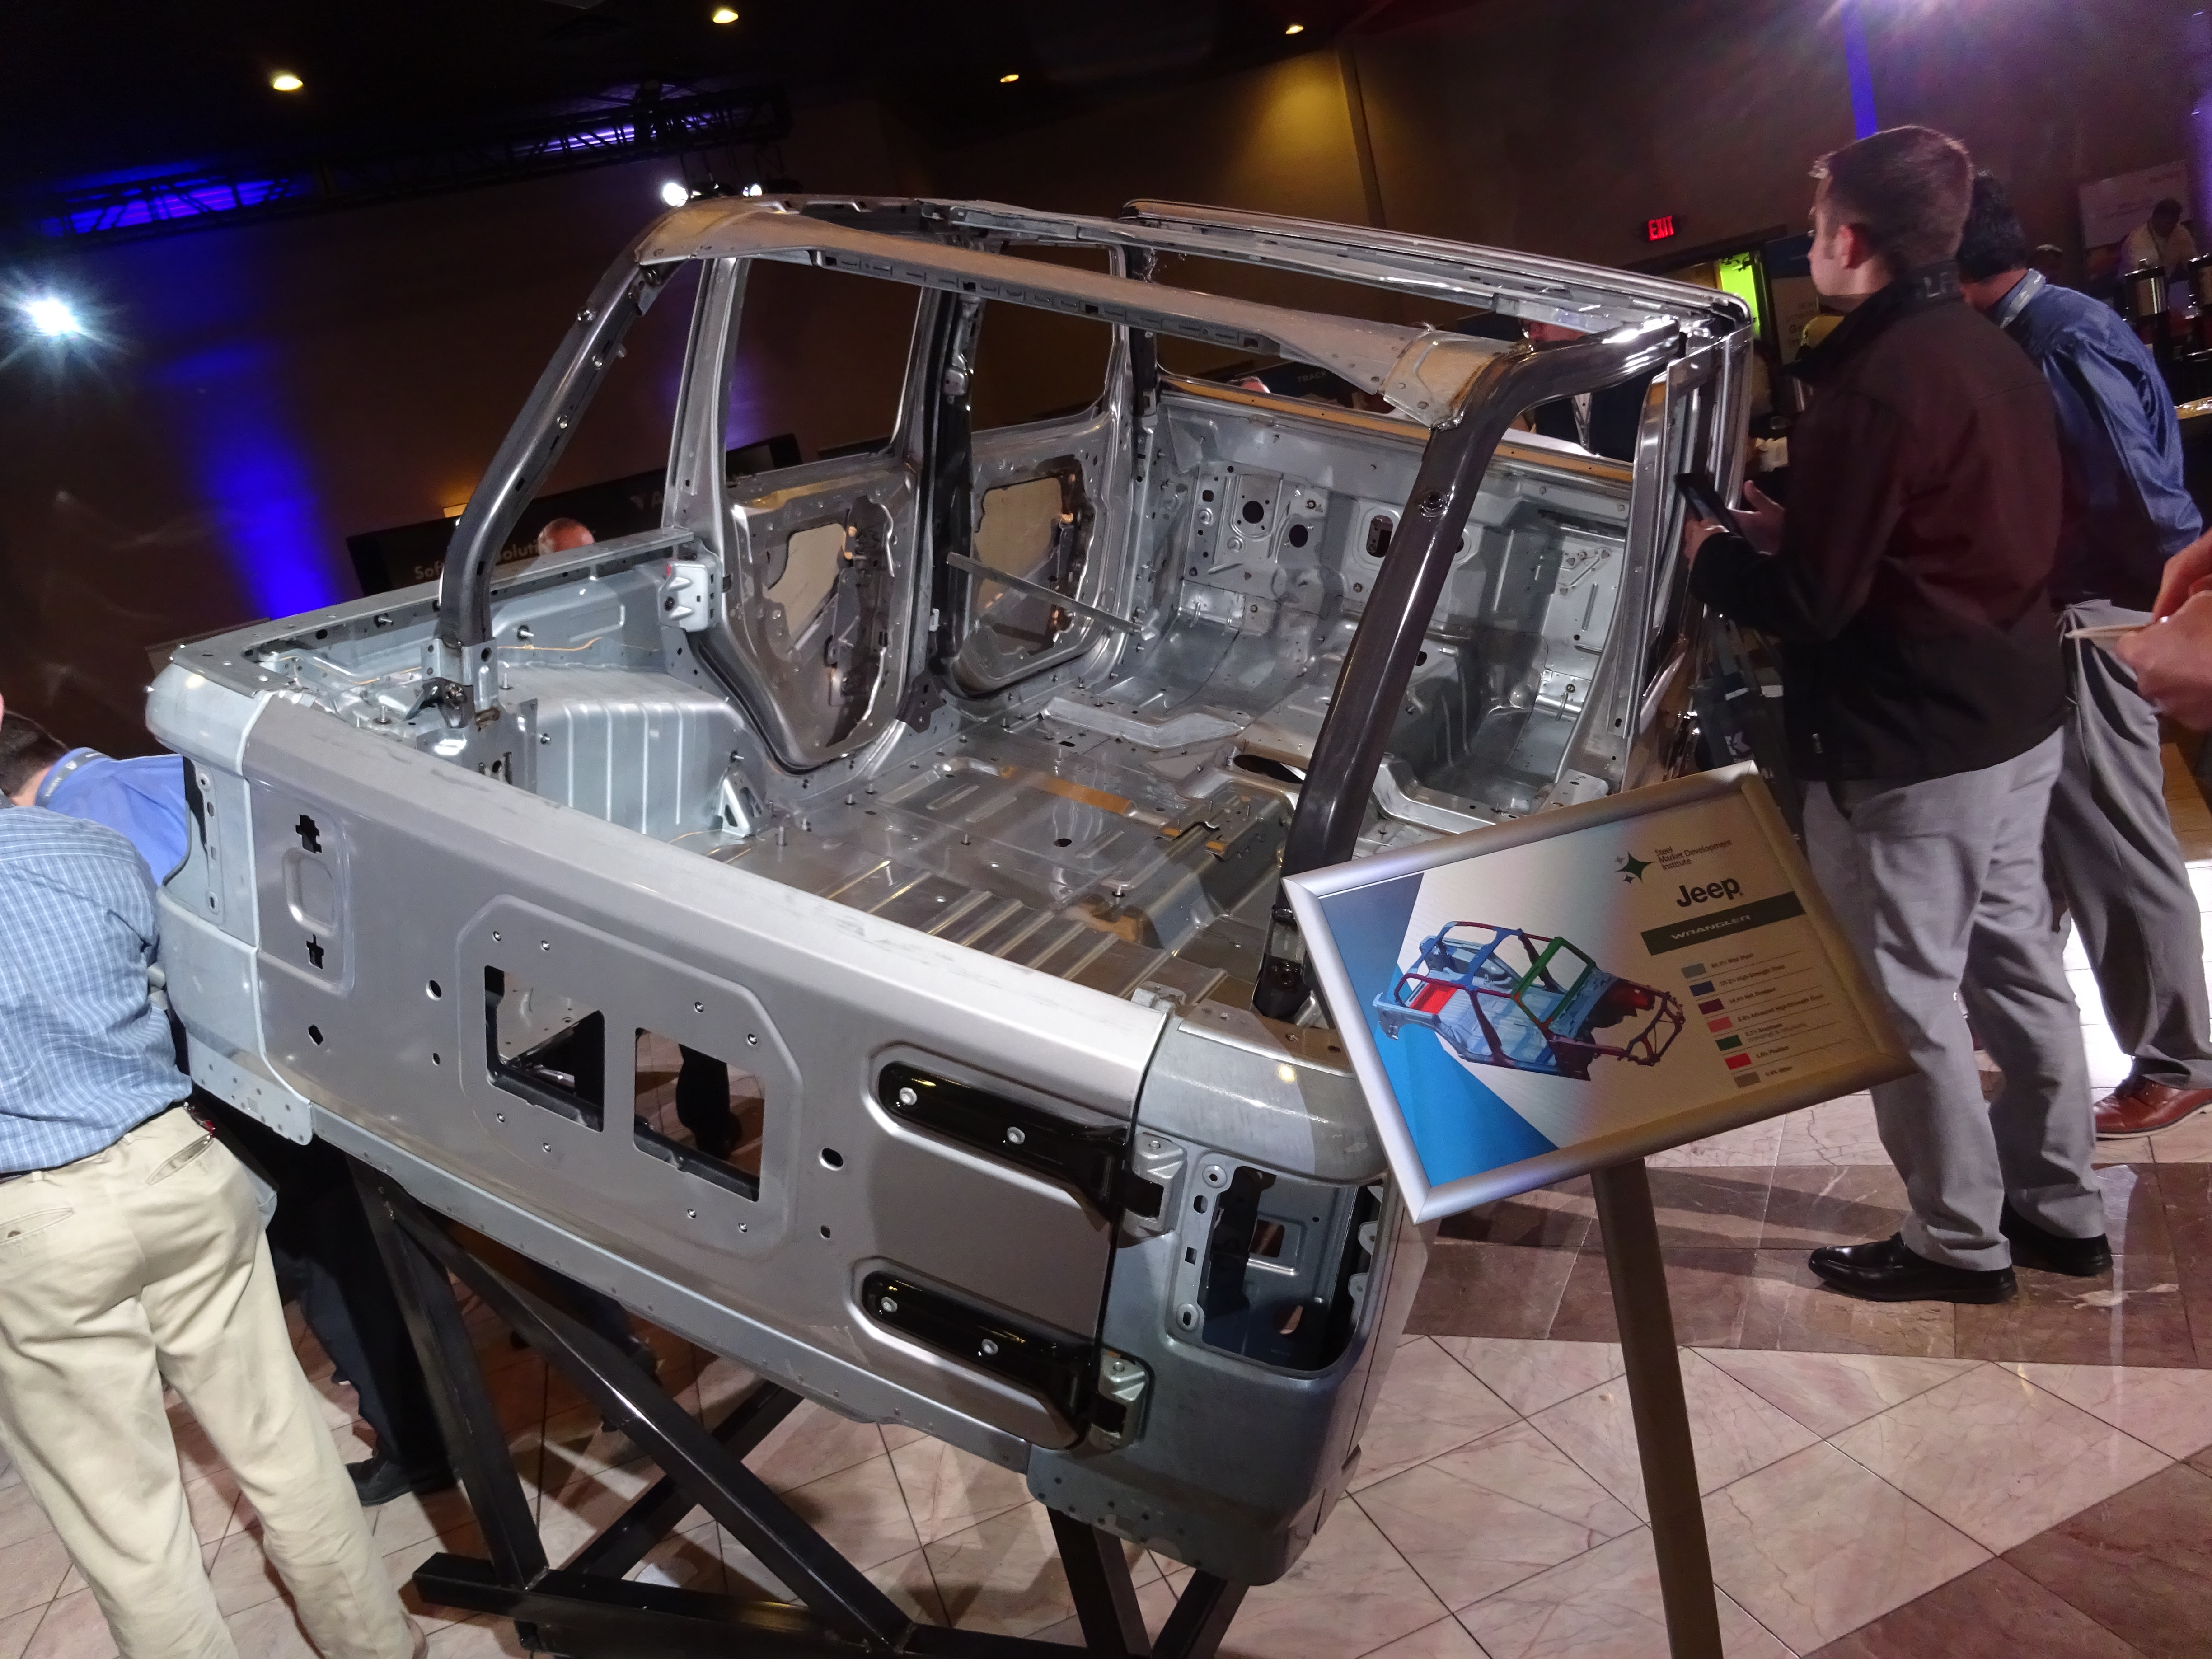 2018 Jeep Wrangler: Frame among significant high-strength steel content |  Repairer Driven News